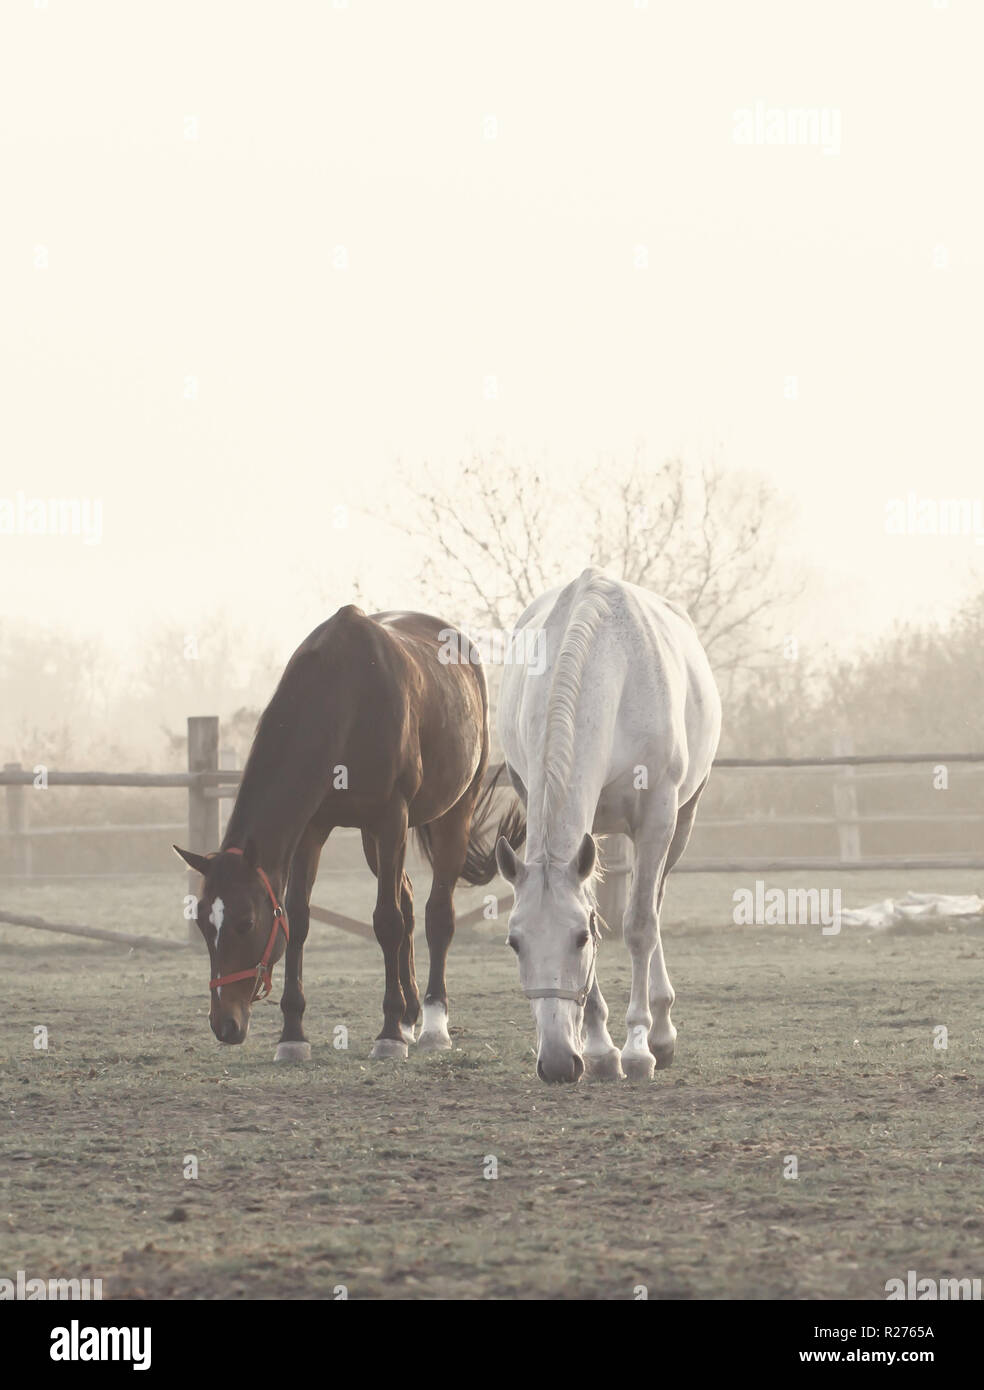 two horses on misty ranch Stock Photo